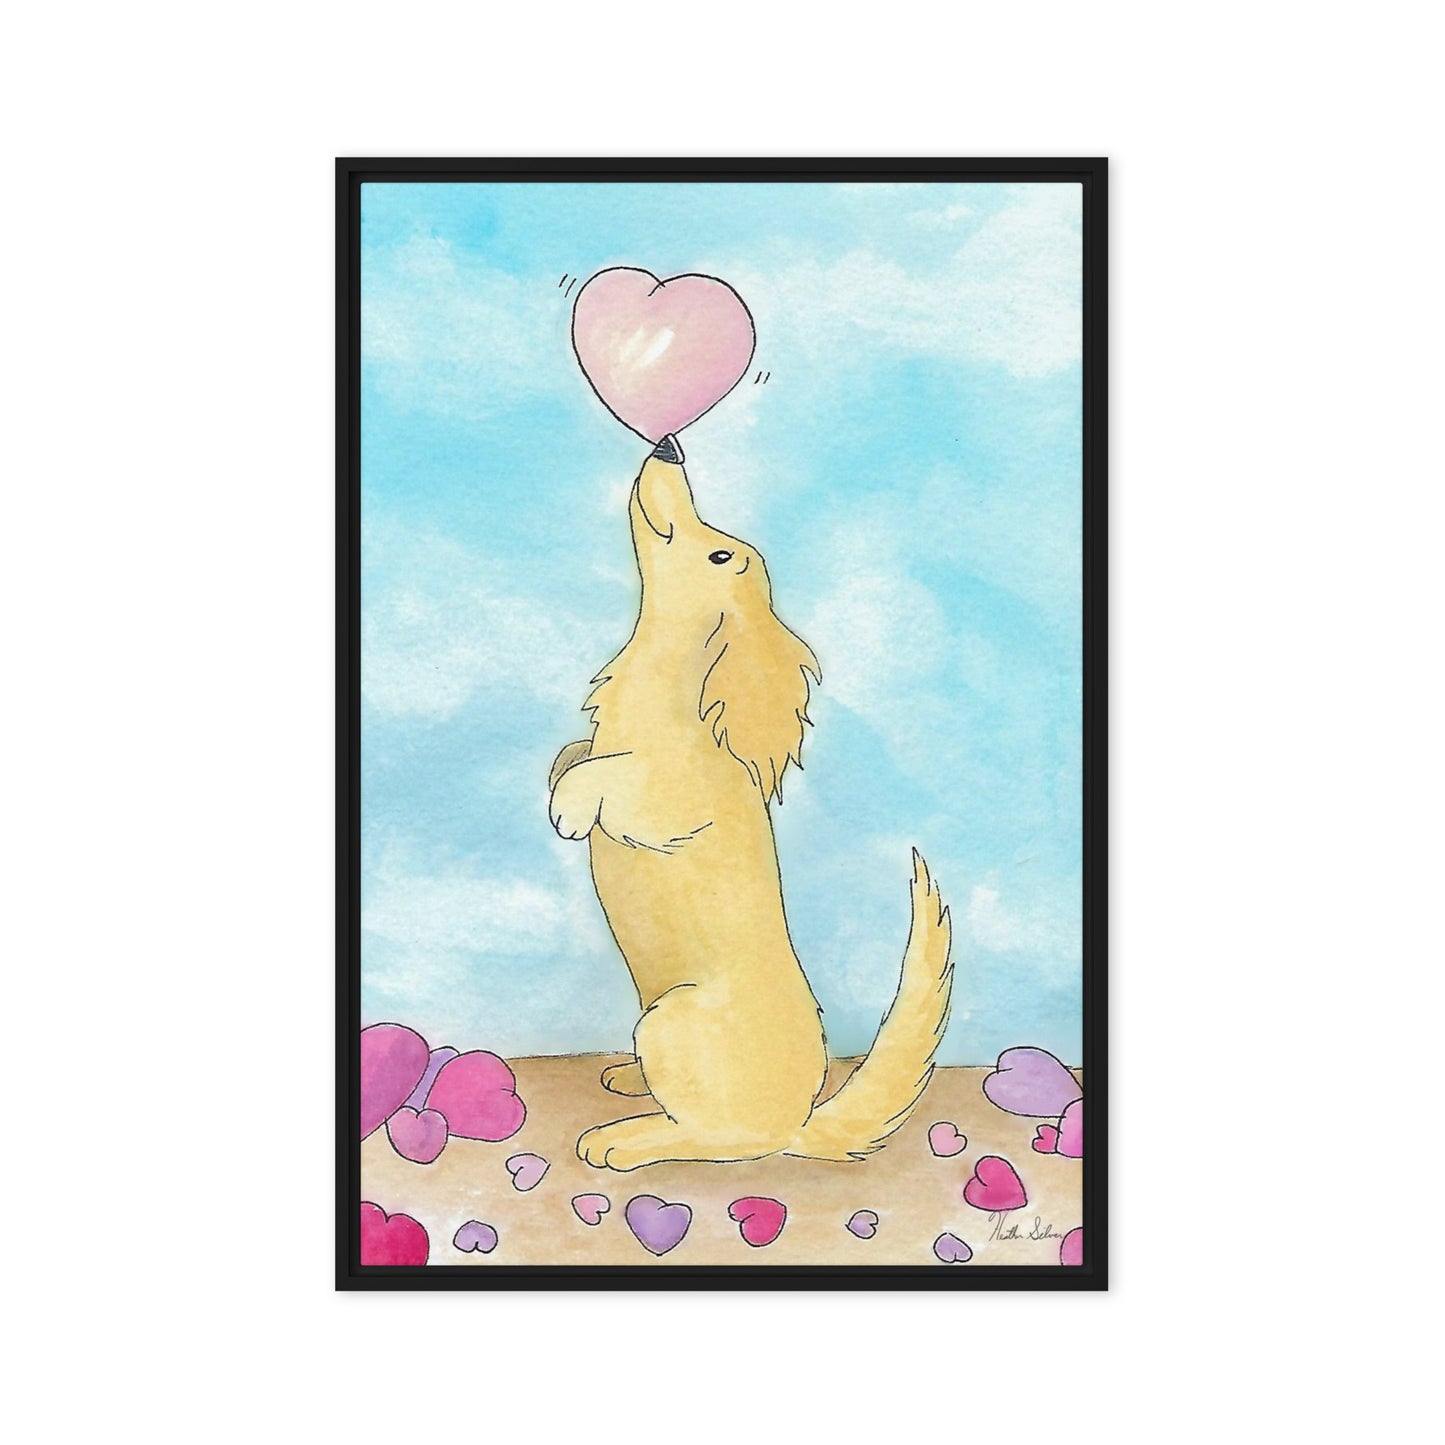 20 by 30 inch framed canvas Puppy Love print. The canvas is in a black pine wood frame.